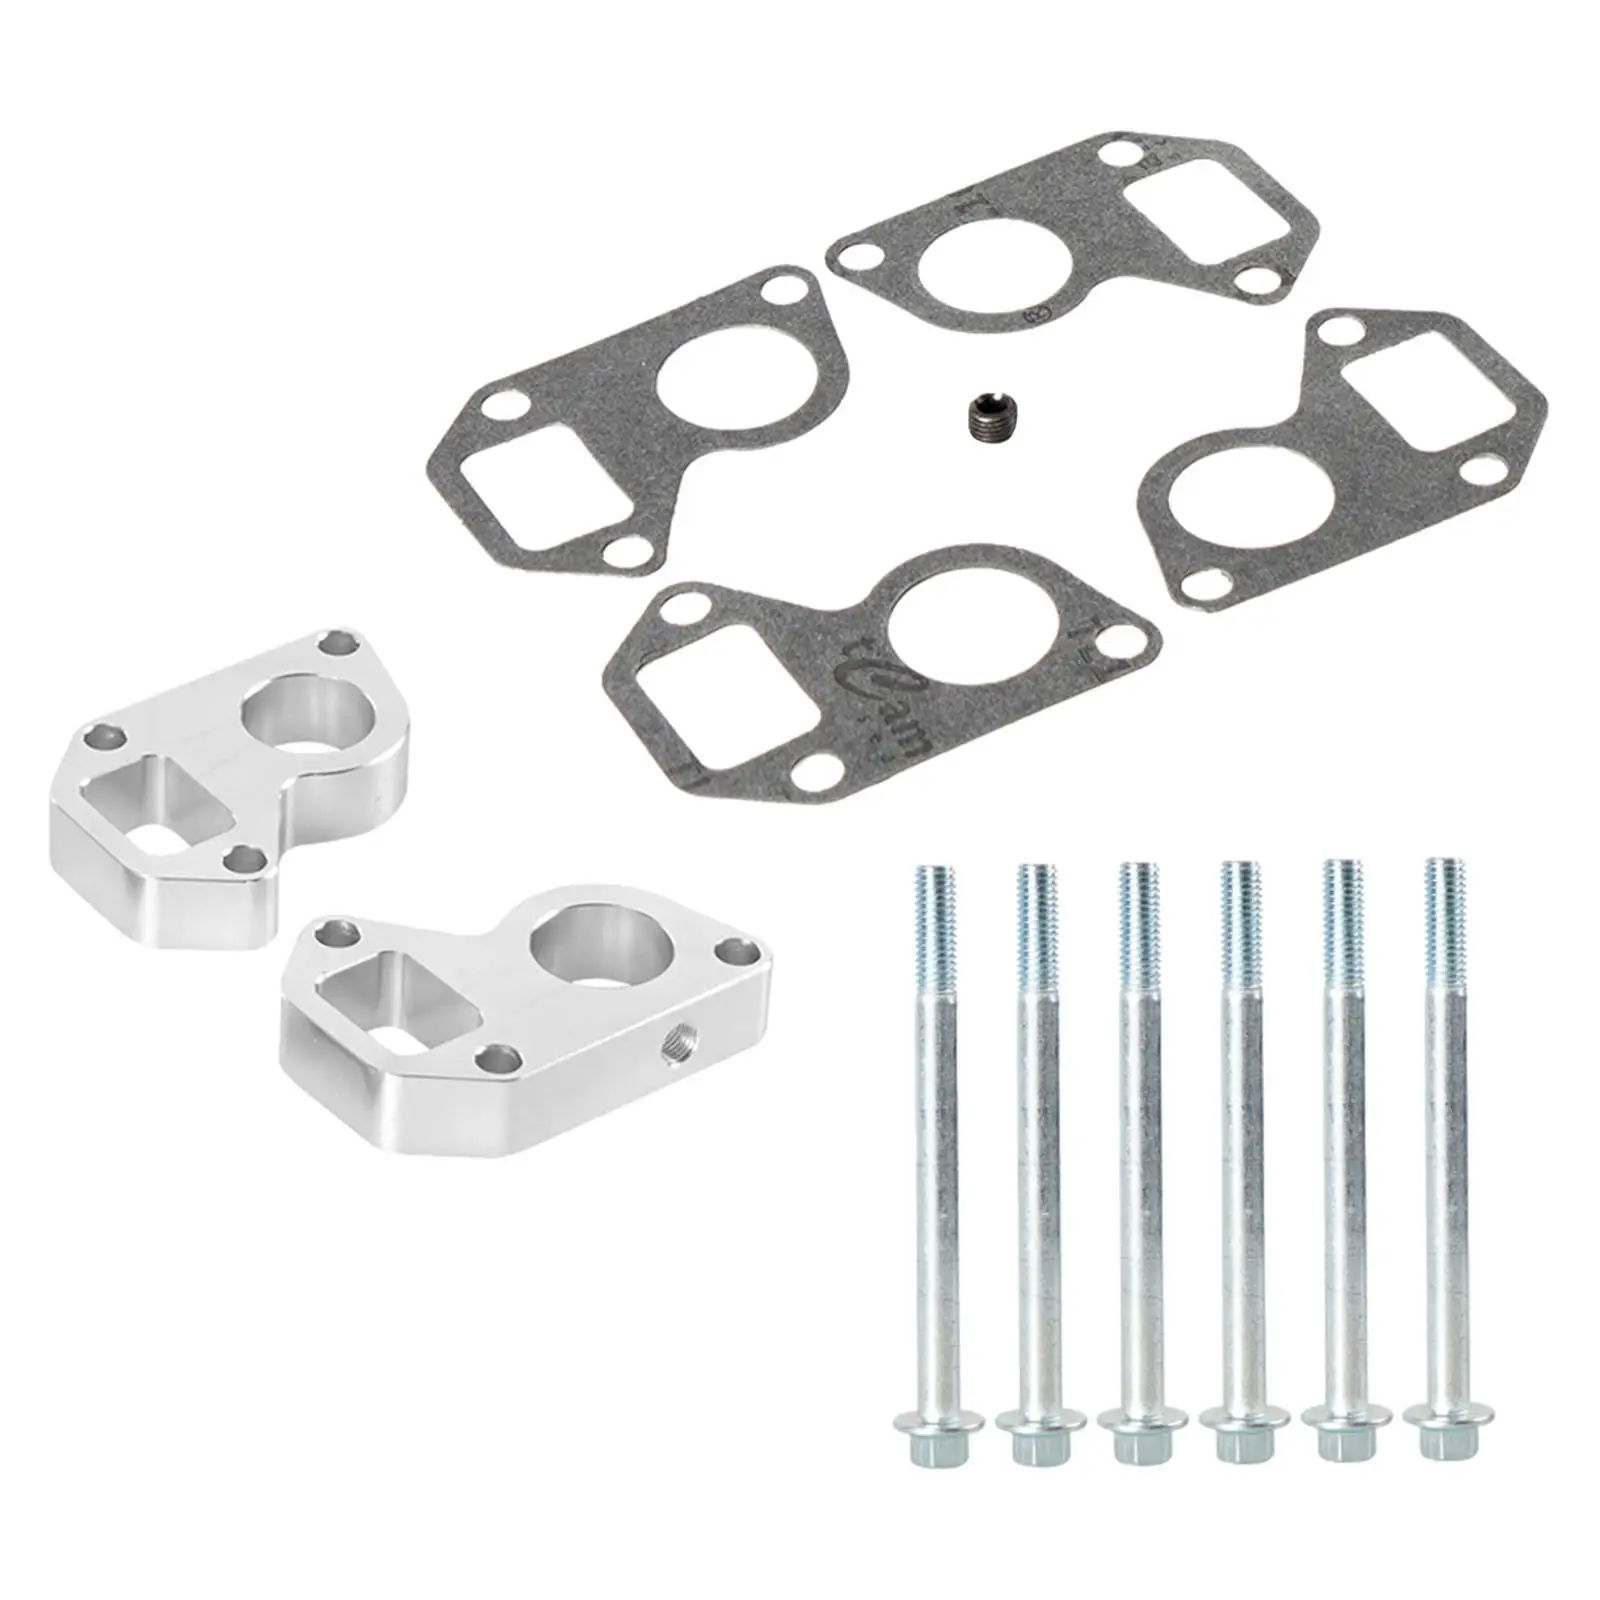 1 Set Water Pump Spacer Truck Adapter Swap Kit, for LS Replace Easy to Install